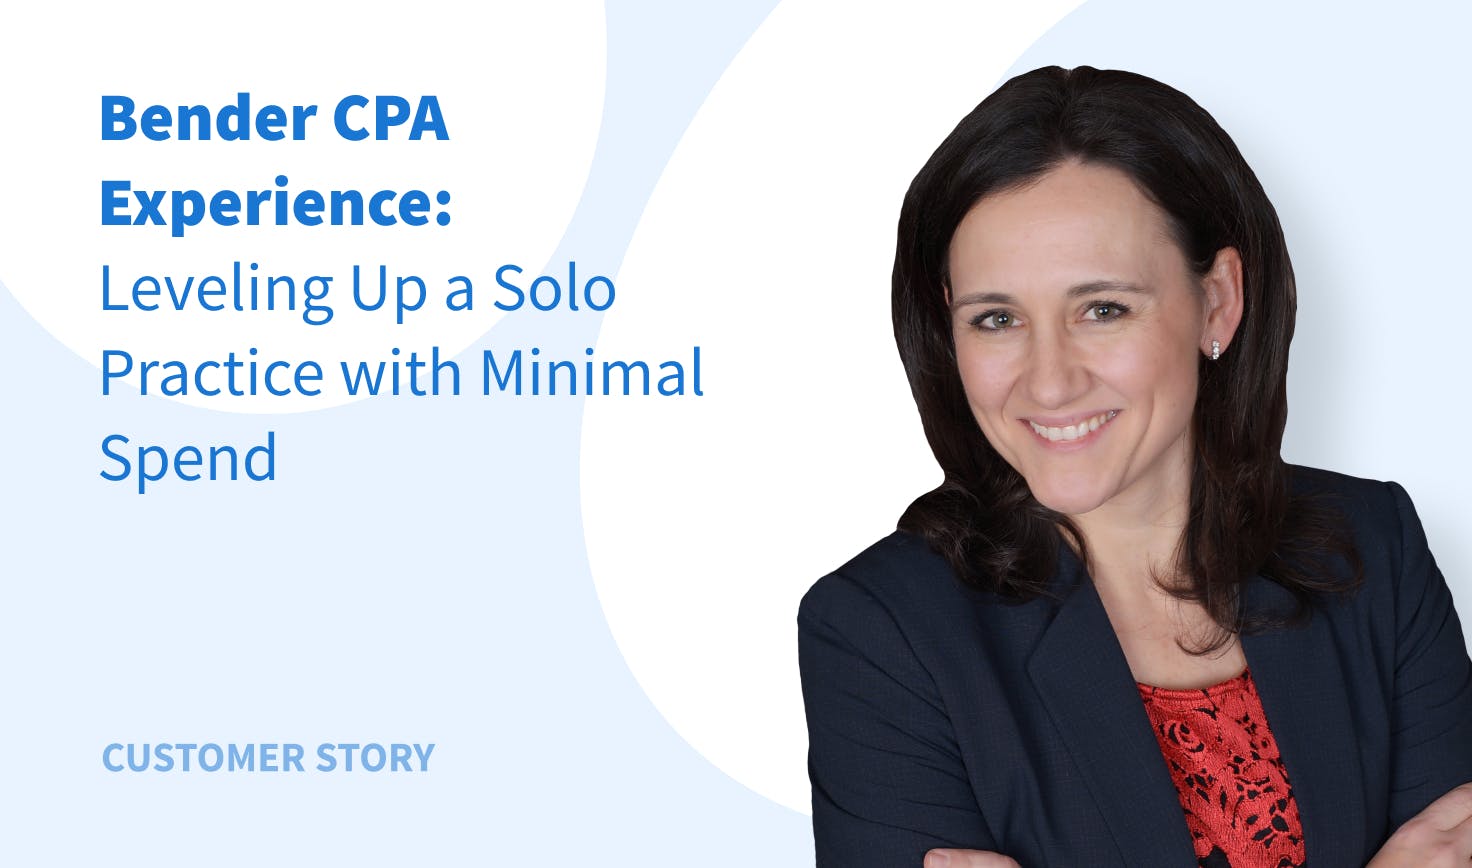 Bender CPA Experience: Leveling Up a Solo Practice with Minimal Spend